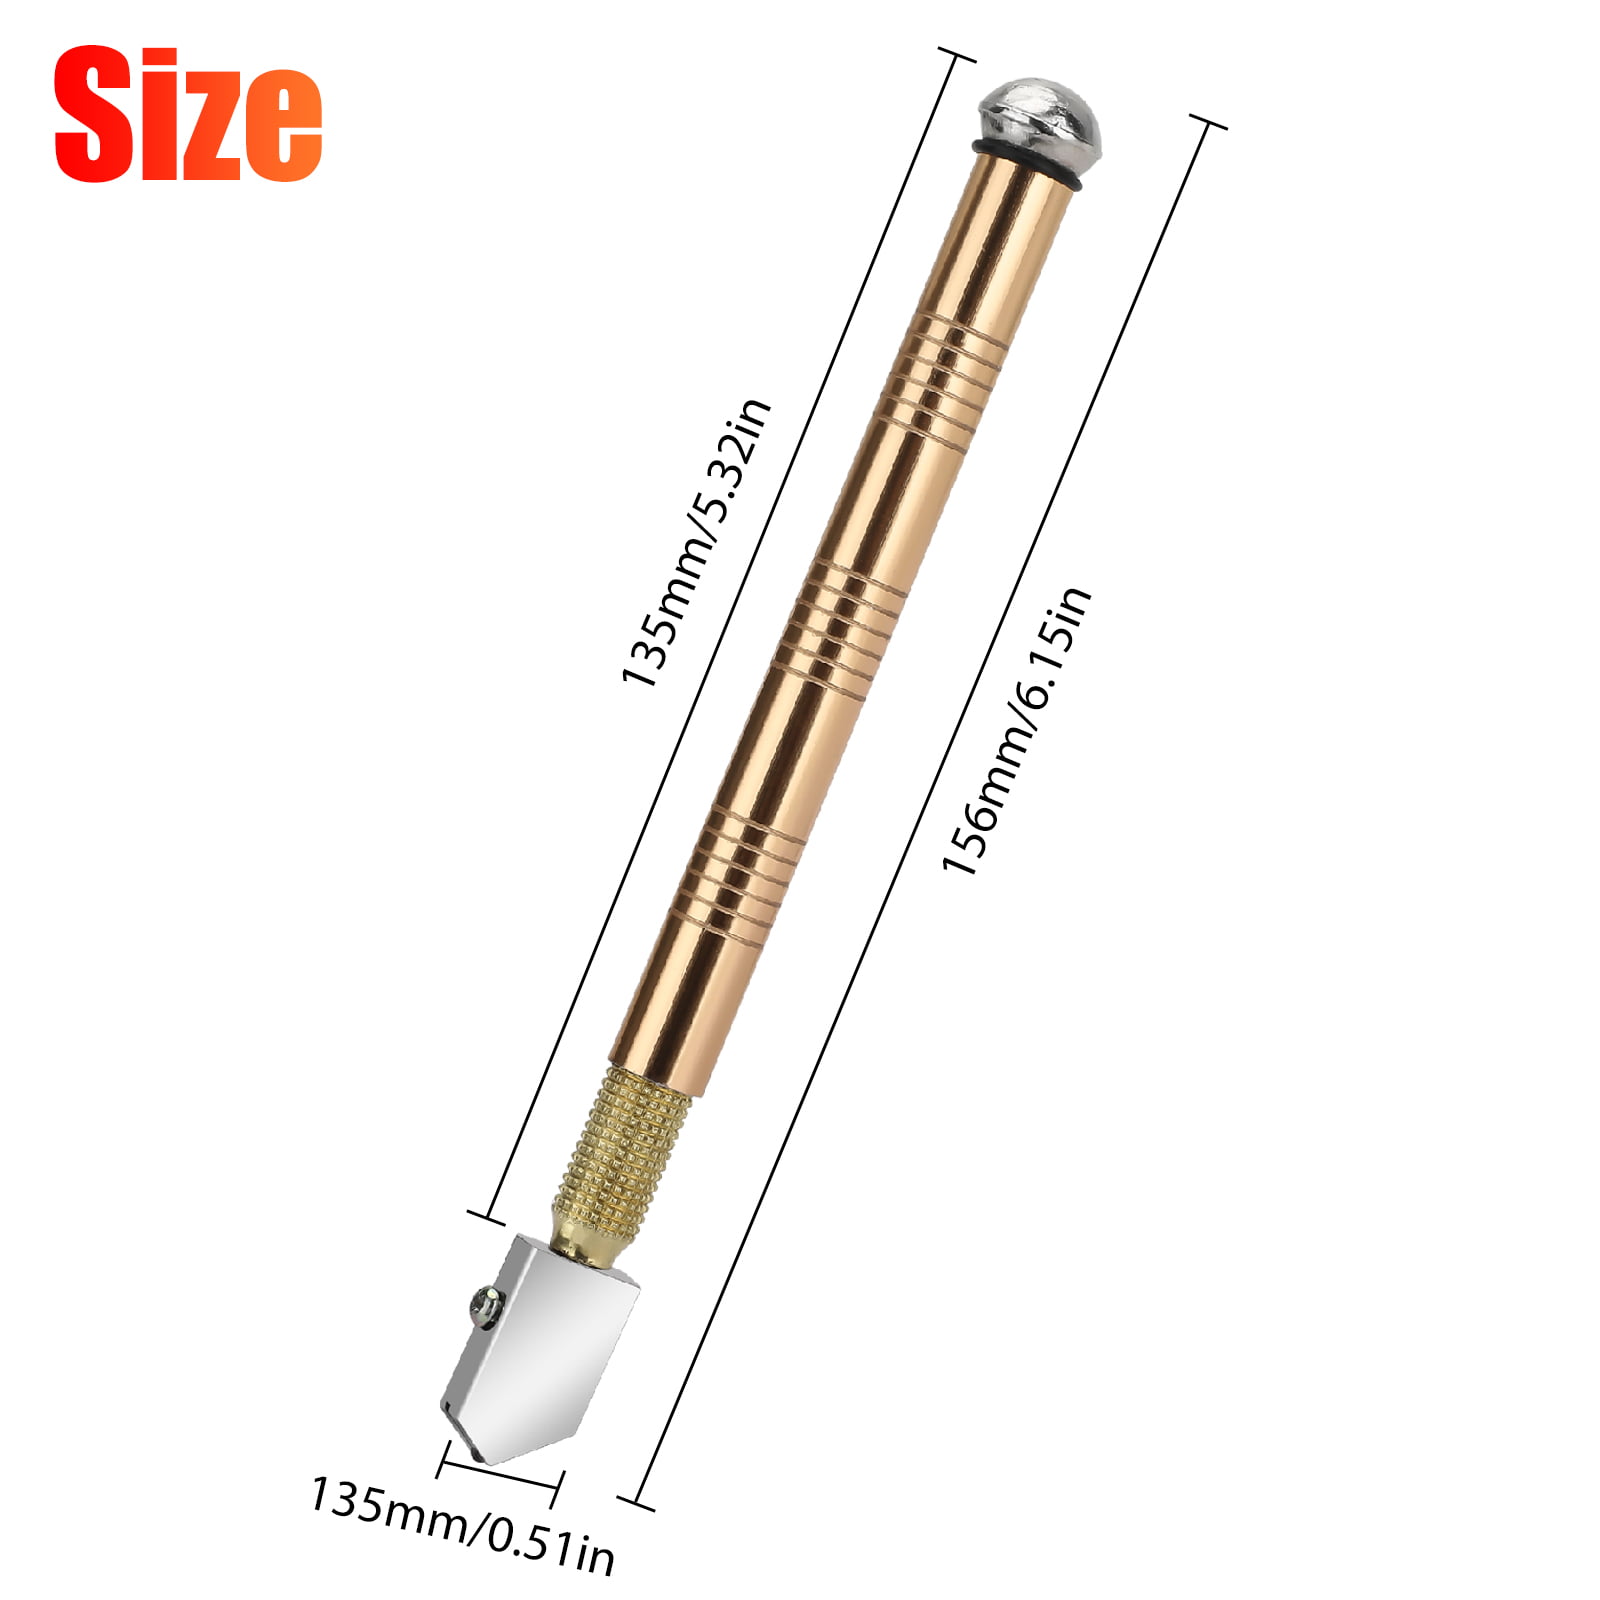 Glass Cutters Tool 2-20mm for Thick Glass Tiles Mirror Mosaic Cutting, Diamond Glass Cutter Tile Cutter with Ergonomic Handle